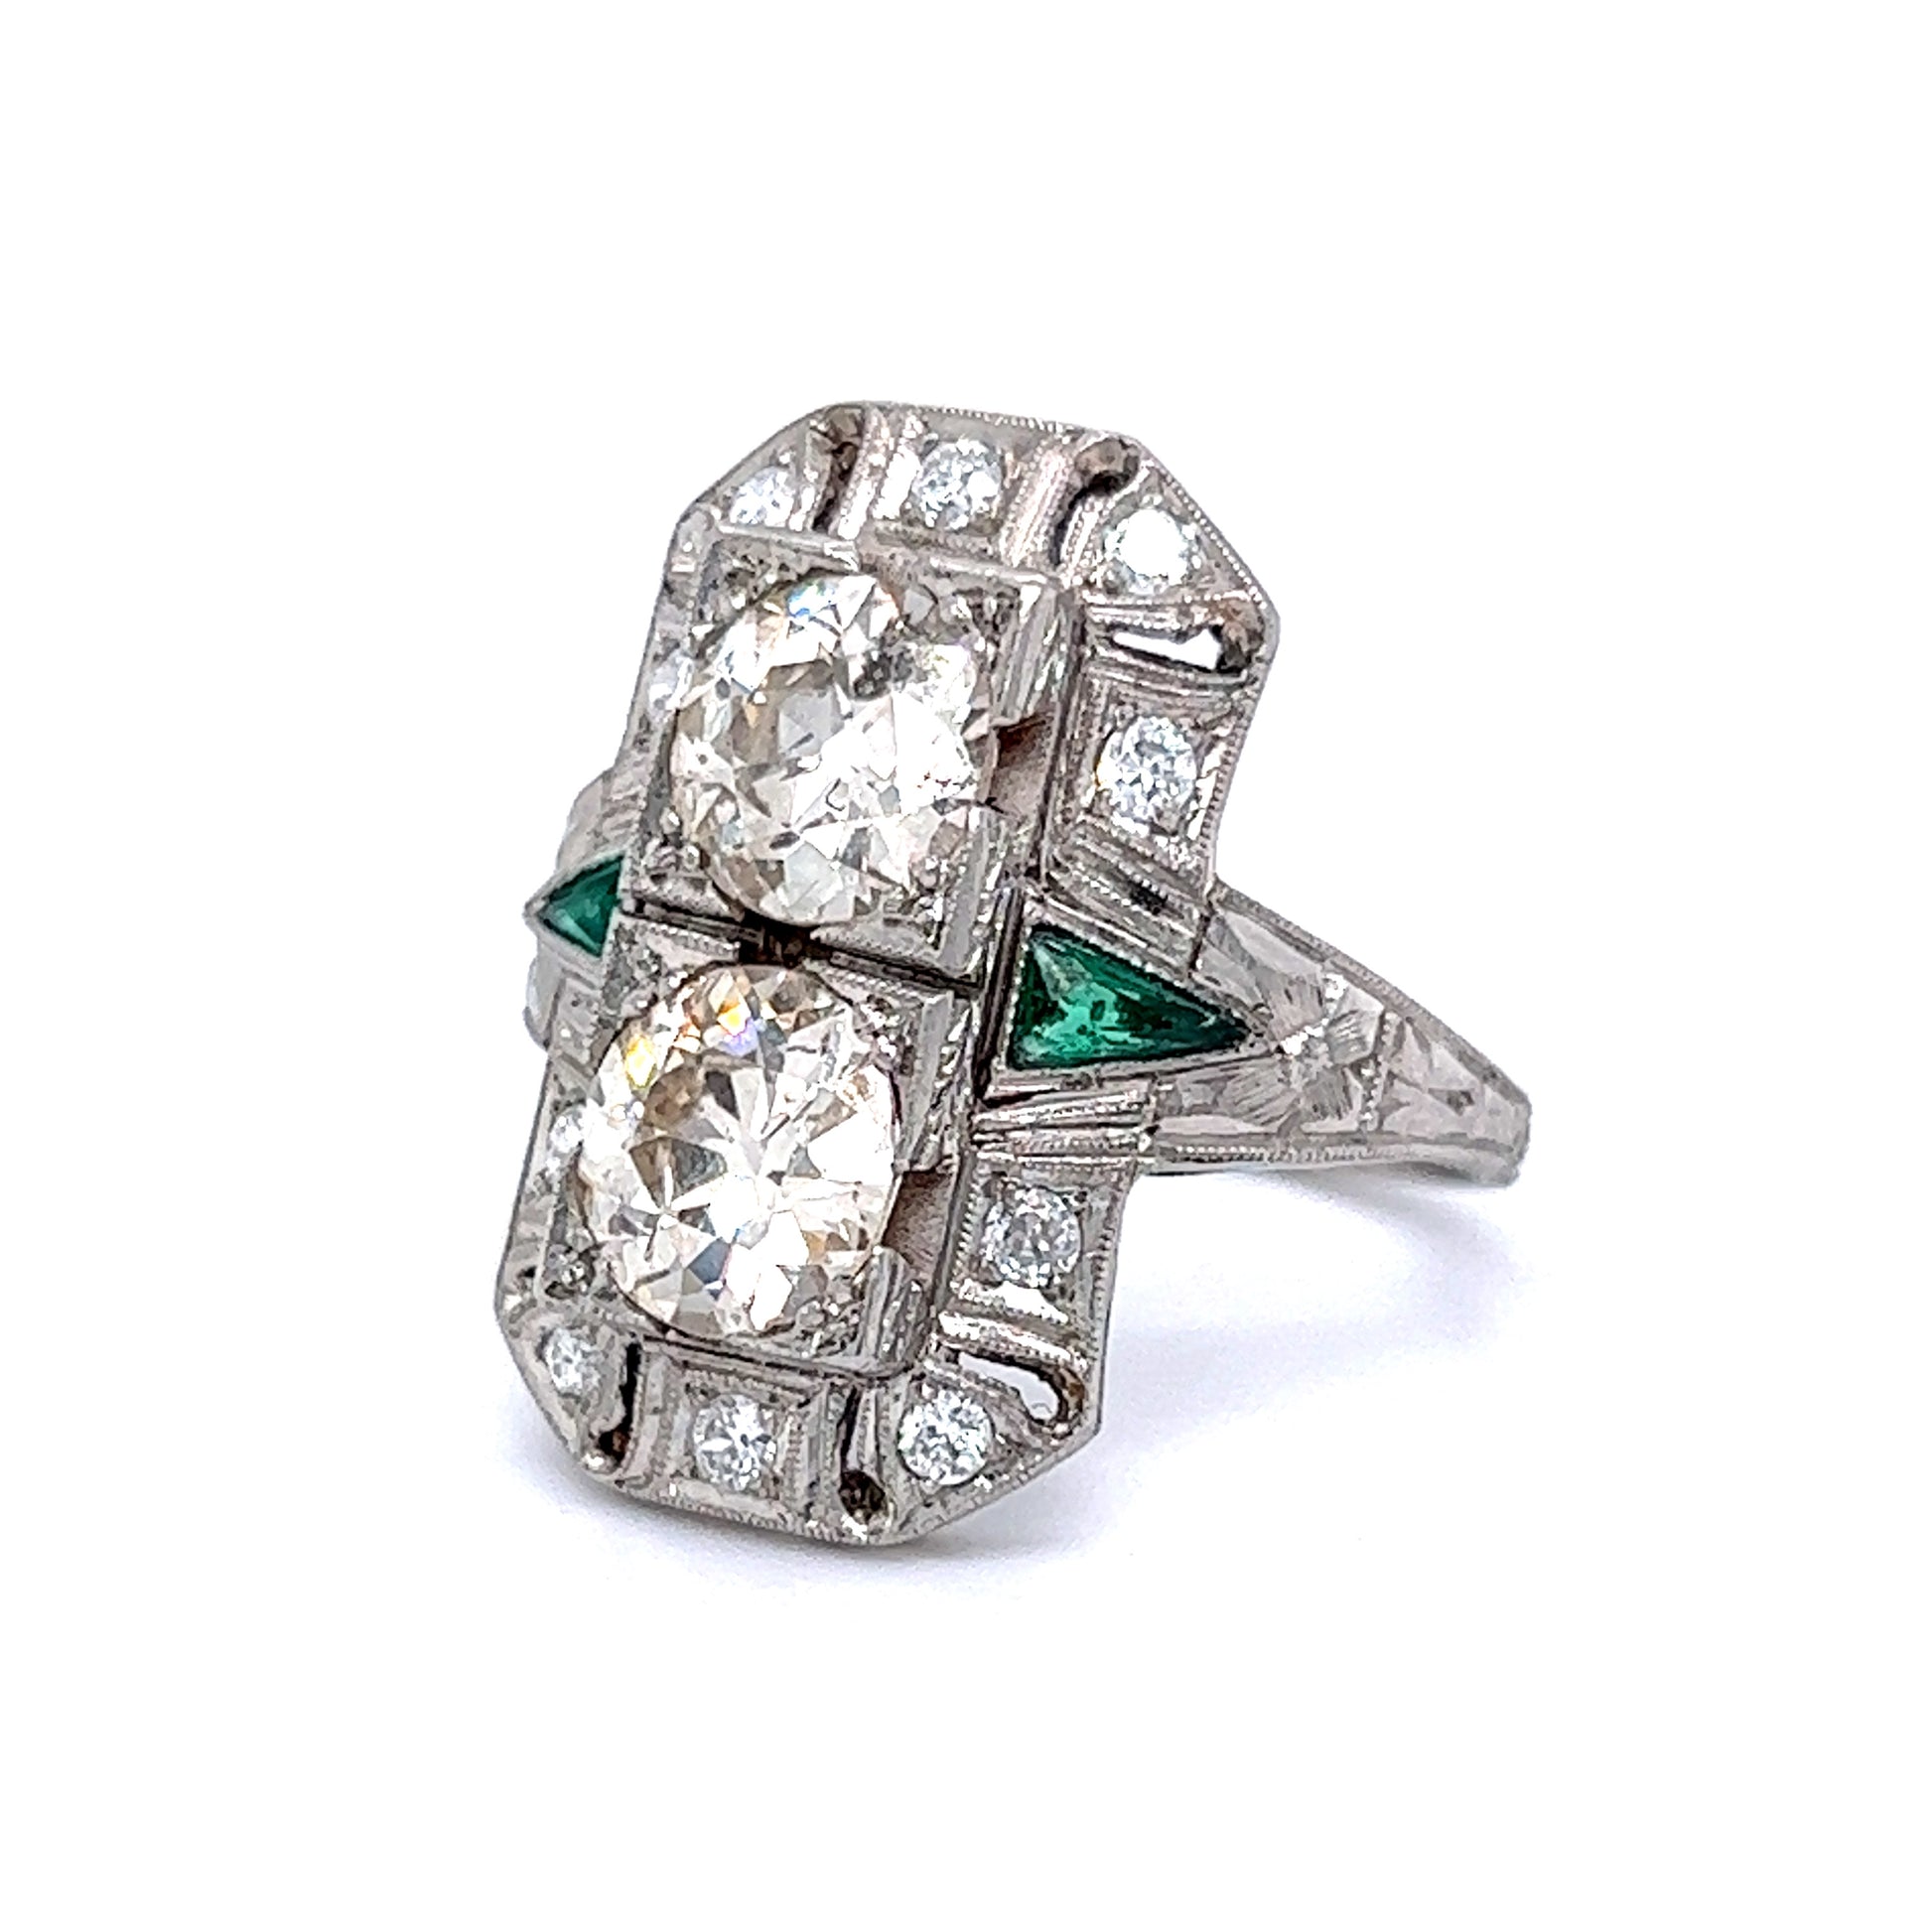 Antique Double Diamond & Emerald Cocktail Ring in PlatinumComposition: PlatinumRing Size: 7Total Diamond Weight: 3.0 ctTotal Gram Weight: 9.0 gInscription: PLATINUM